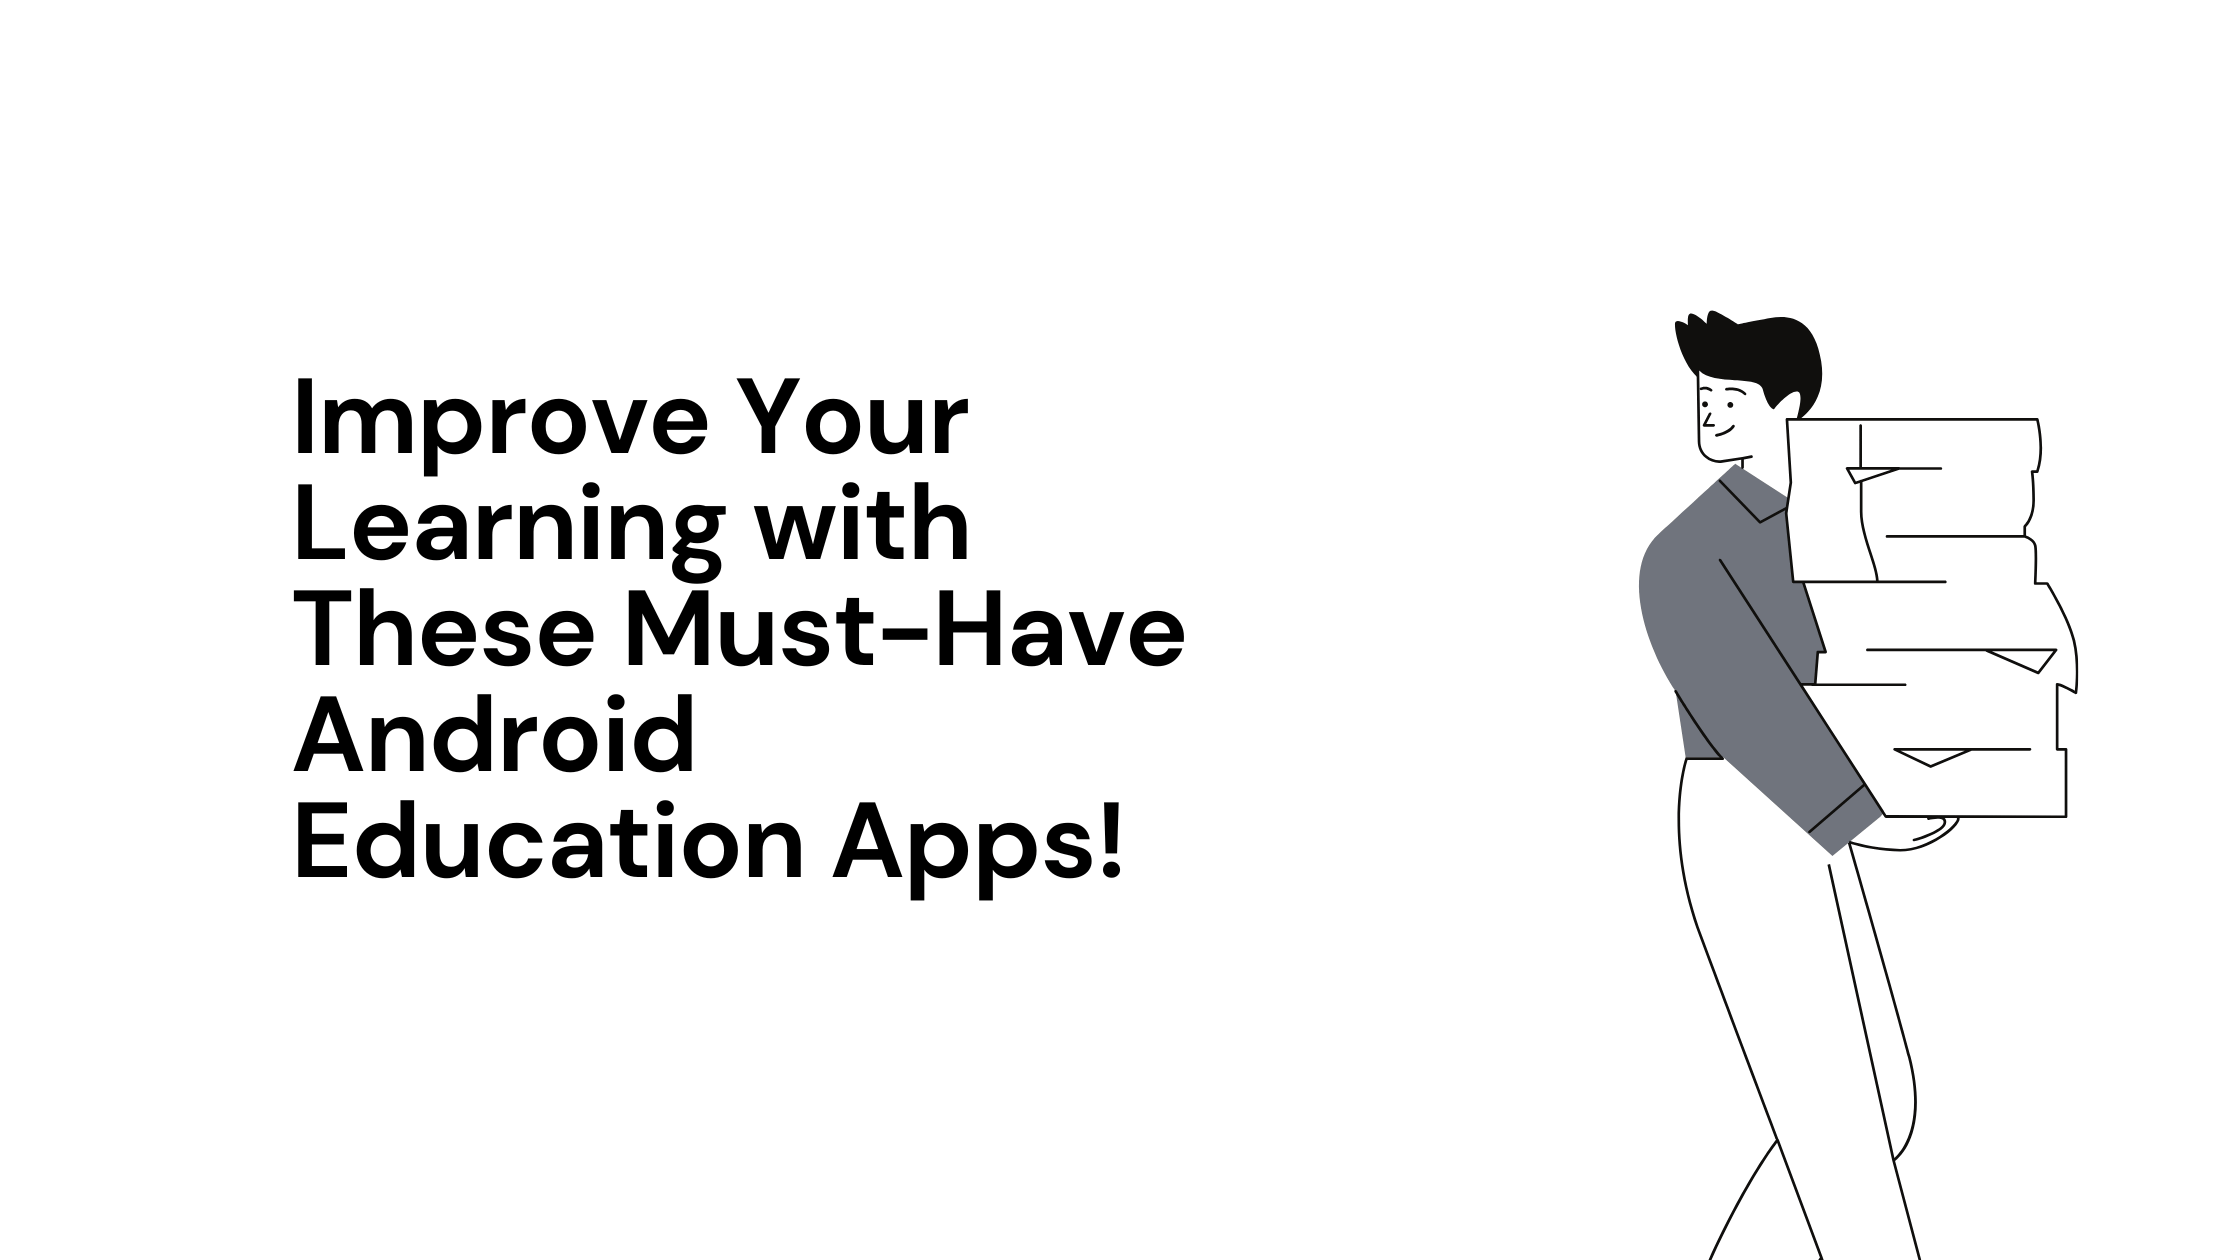 Improve Your Learning With These Must-have Android Education Apps!